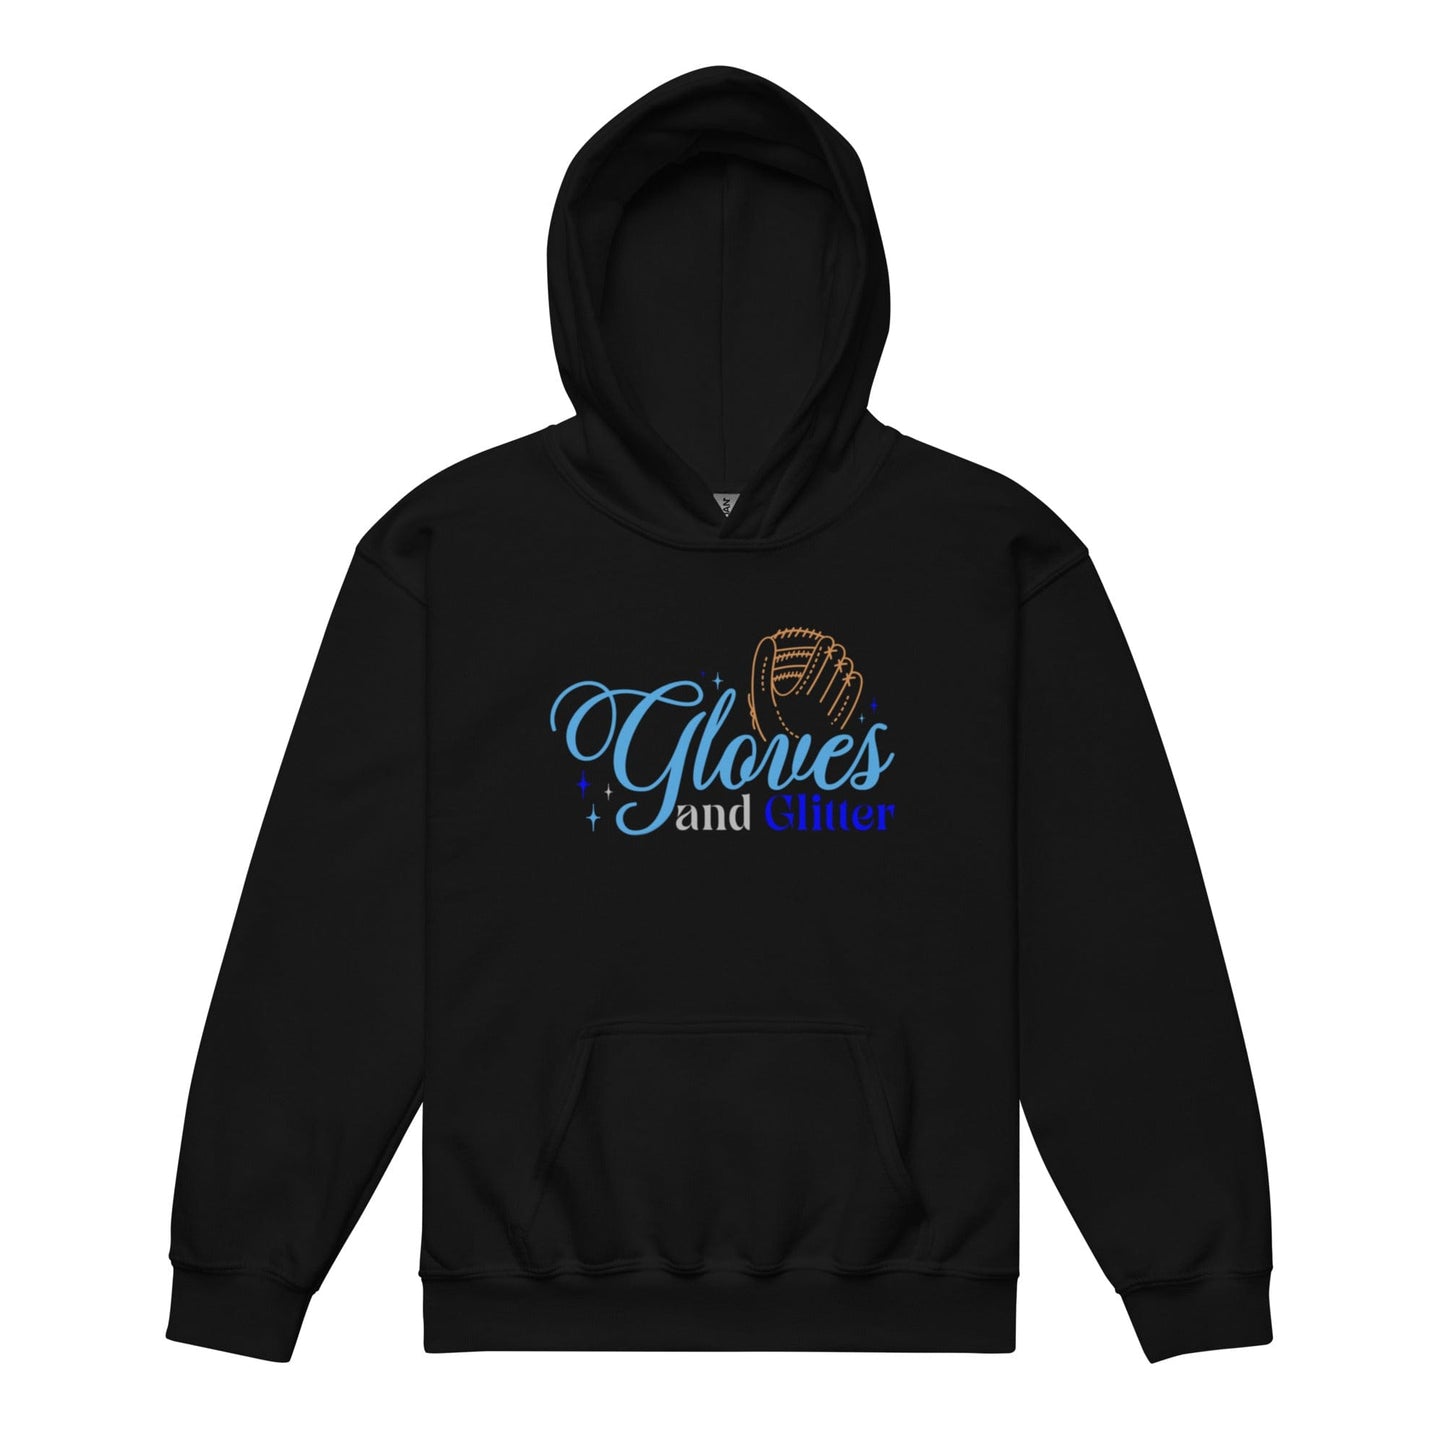 Gloves And Glitter Blue - Youth Hoodie